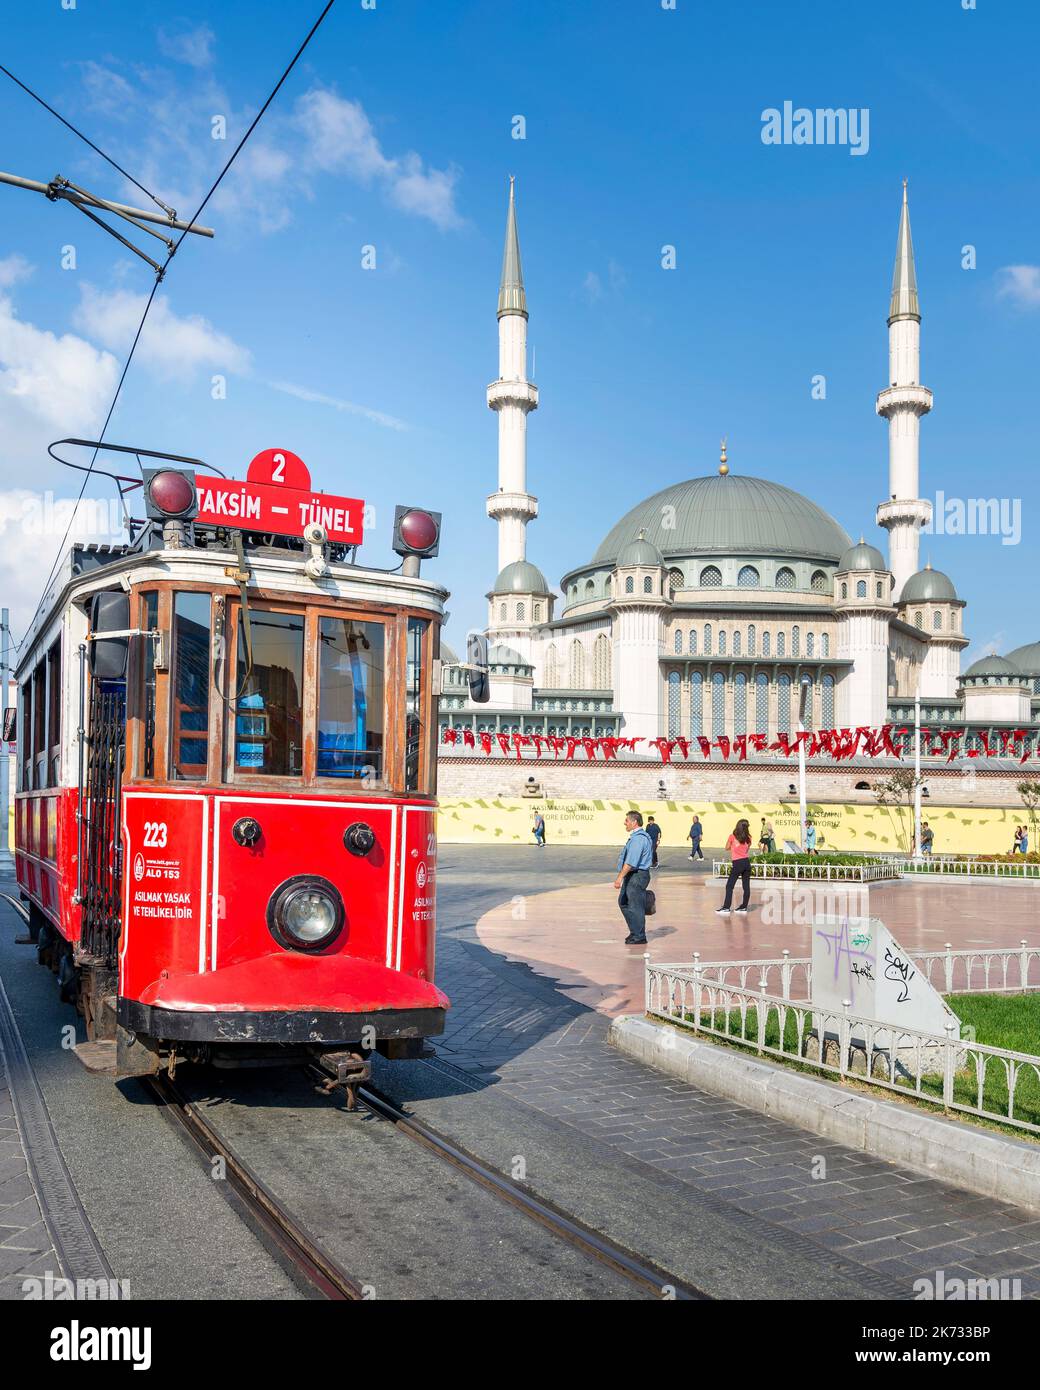 Istanbul, Turkey - September 2 2022: Nostalgic Taksim Tunel Red Tram, or tramvay, with Taksim Mosque in the background, at Taksim Square, Beyoglu district, central Istanbul, in a sunny summer day Stock Photo